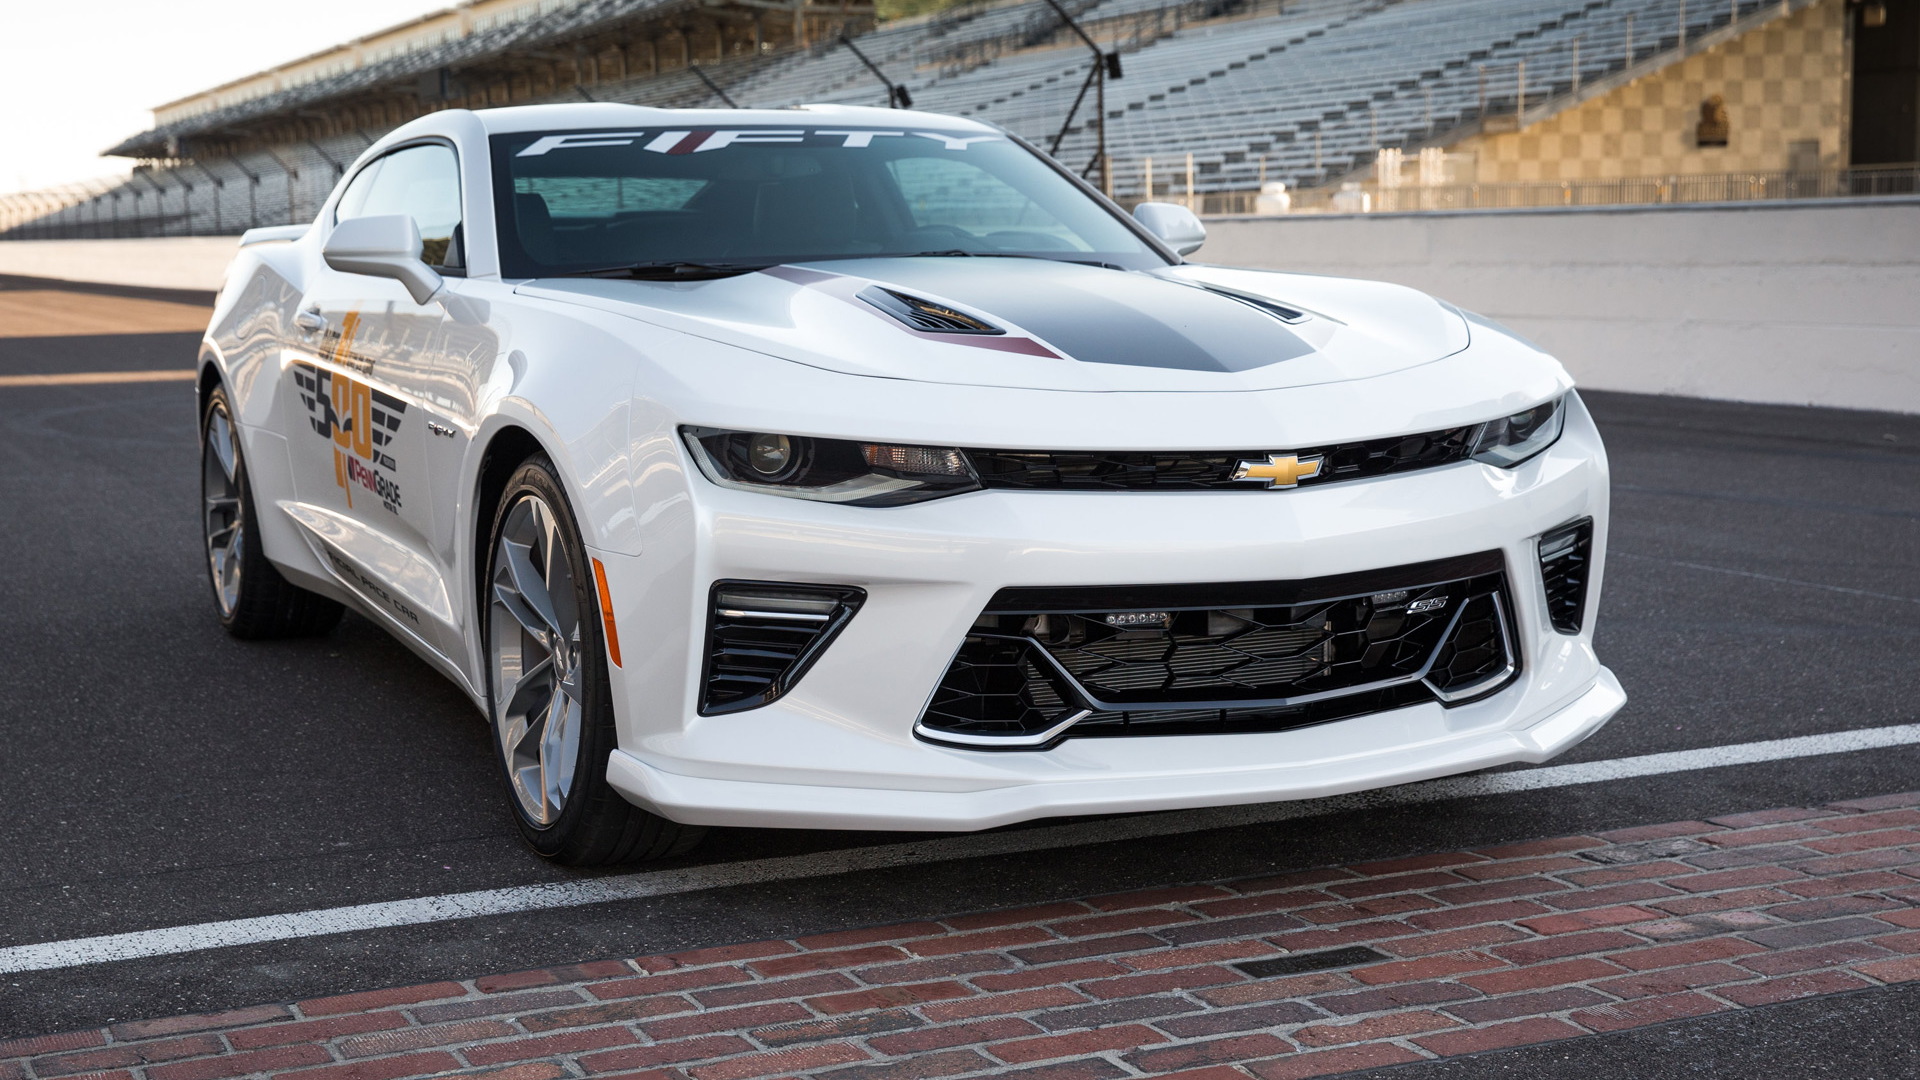 2017 Chevrolet Camaro SS 50th Anniversary Edition pace car for the 2016 Indianapolis 500